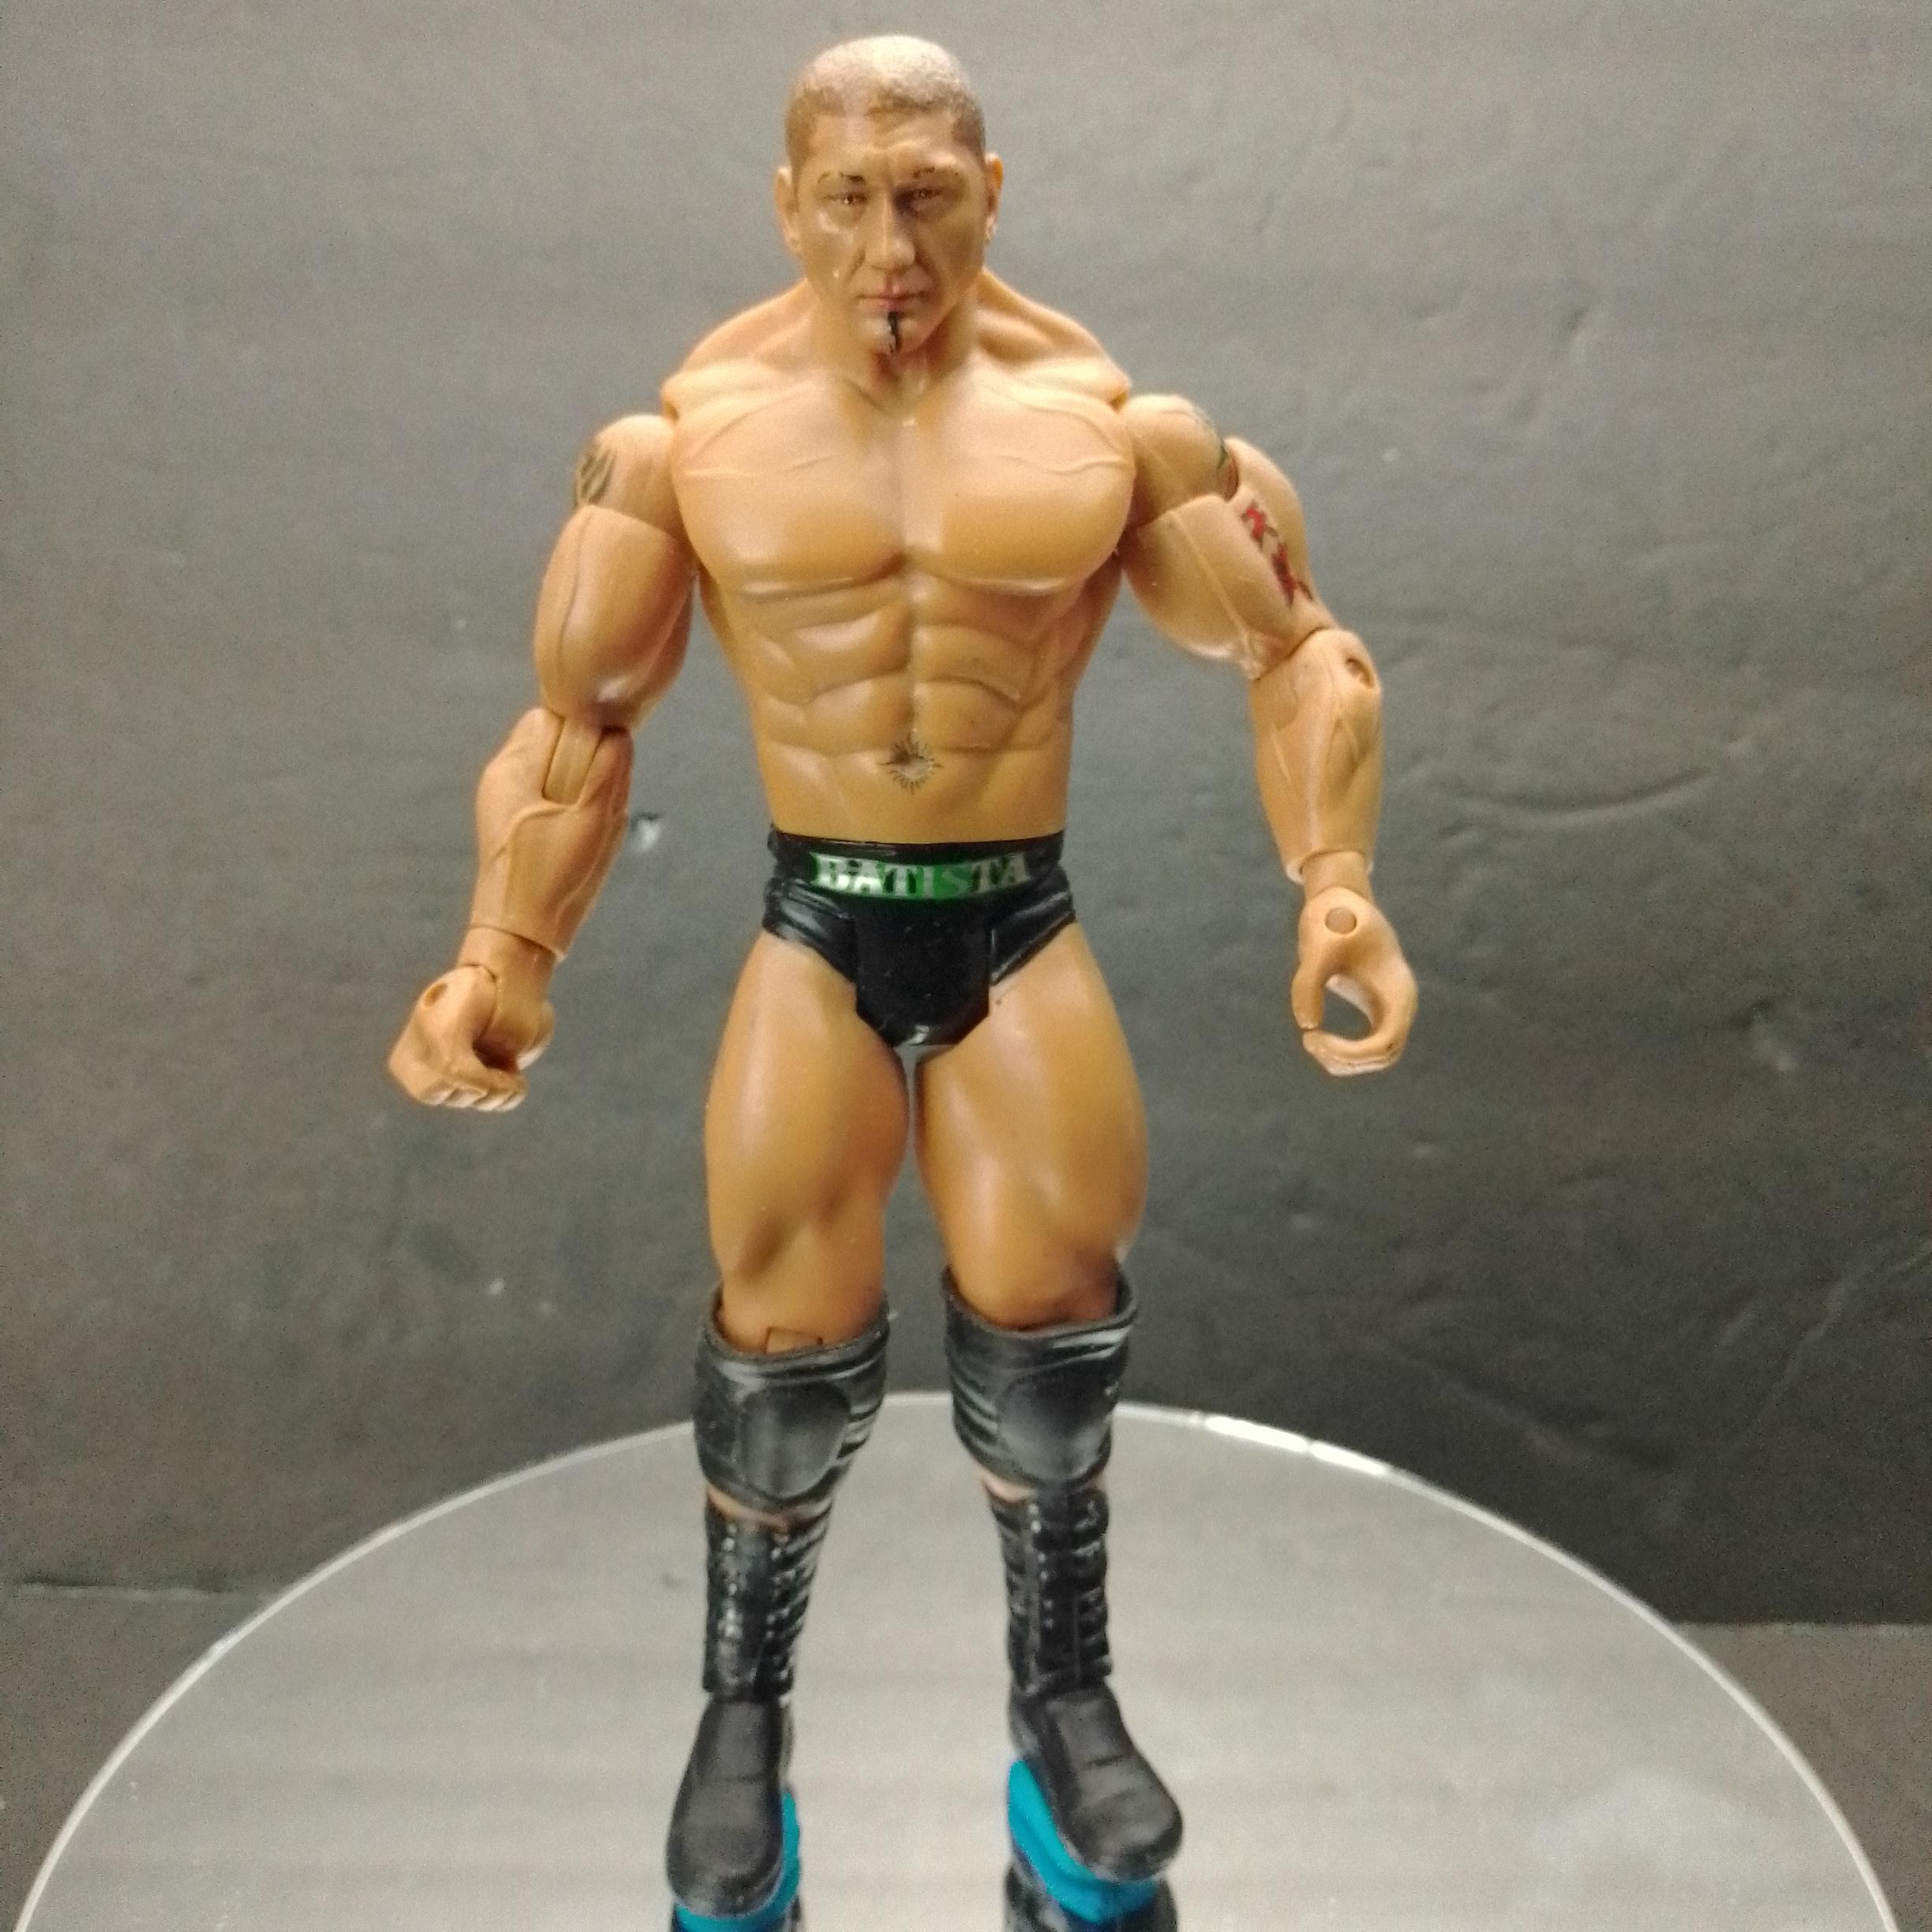 2007 Batista Wrestling Action Figure Black Trunks with Green & Gray Lettering for Sale Front